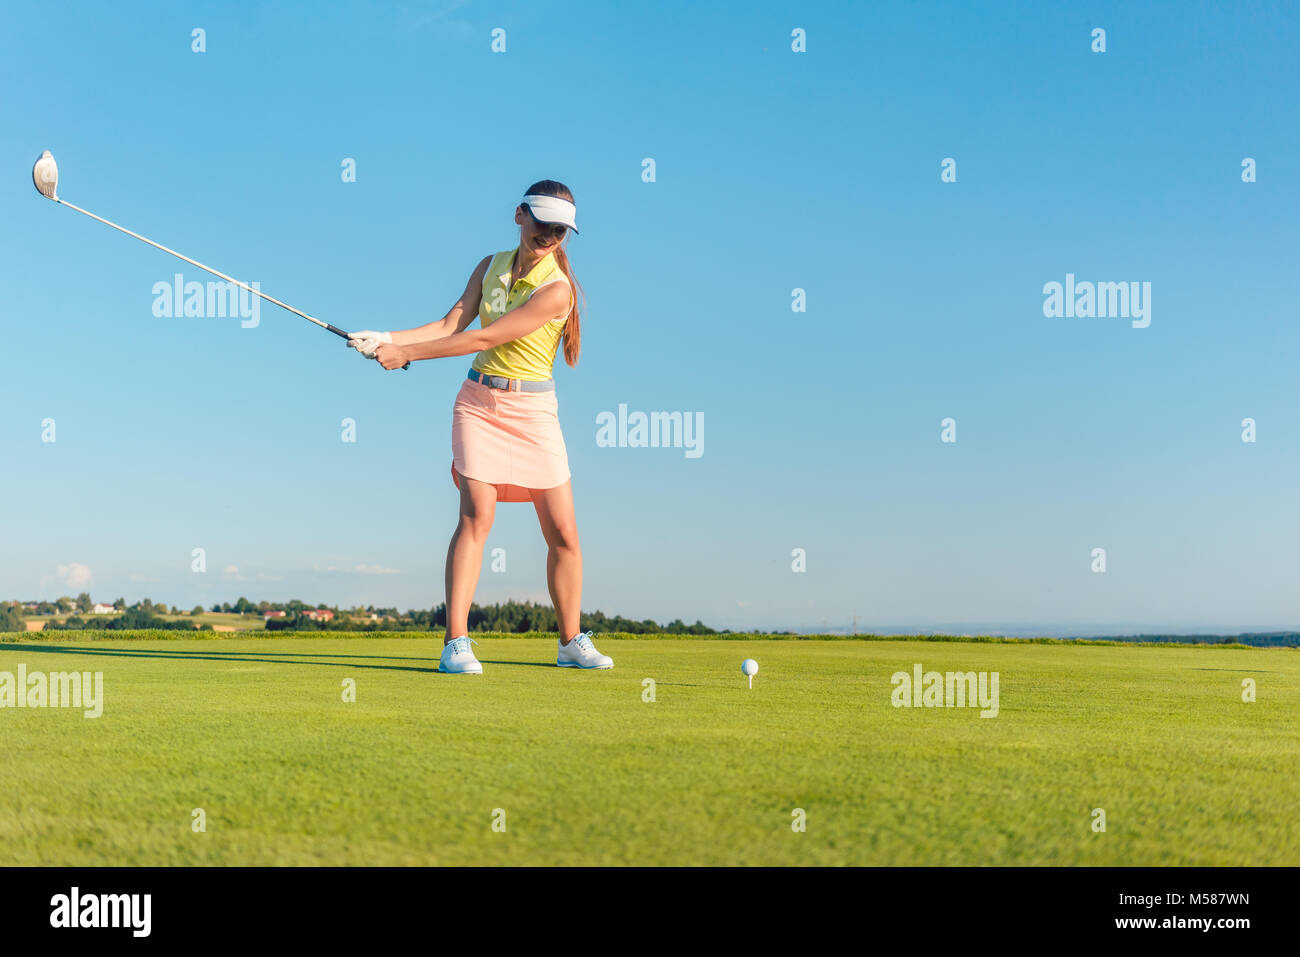 Full length of a professional female golf player smiling while swinging a driver club with concentration and accuracy before hitting the ball during i Stock Photo